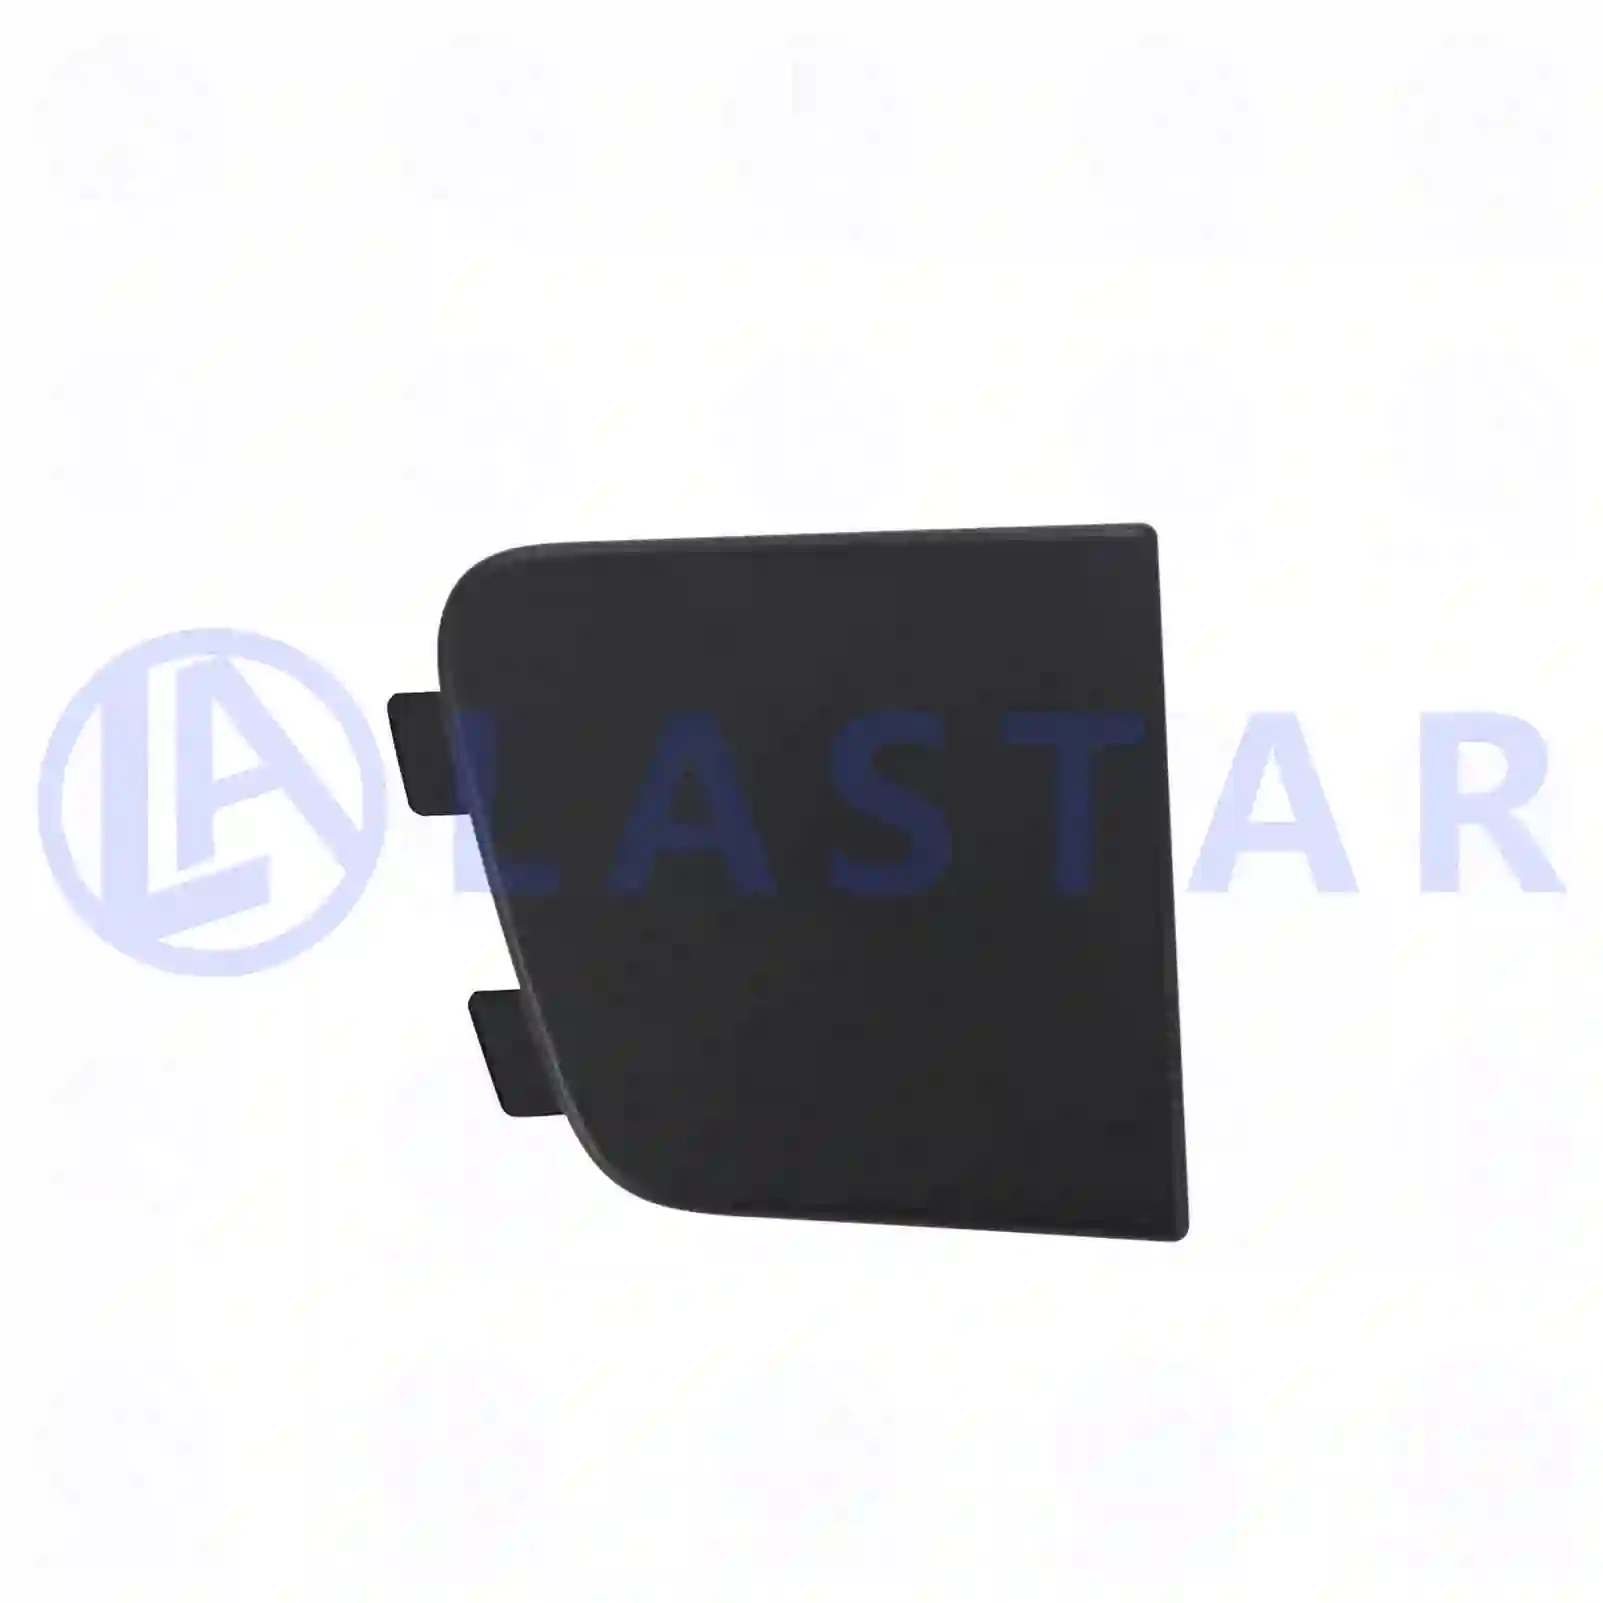 Cover, front grill, right, 77721033, 20529708, 3175548 ||  77721033 Lastar Spare Part | Truck Spare Parts, Auotomotive Spare Parts Cover, front grill, right, 77721033, 20529708, 3175548 ||  77721033 Lastar Spare Part | Truck Spare Parts, Auotomotive Spare Parts